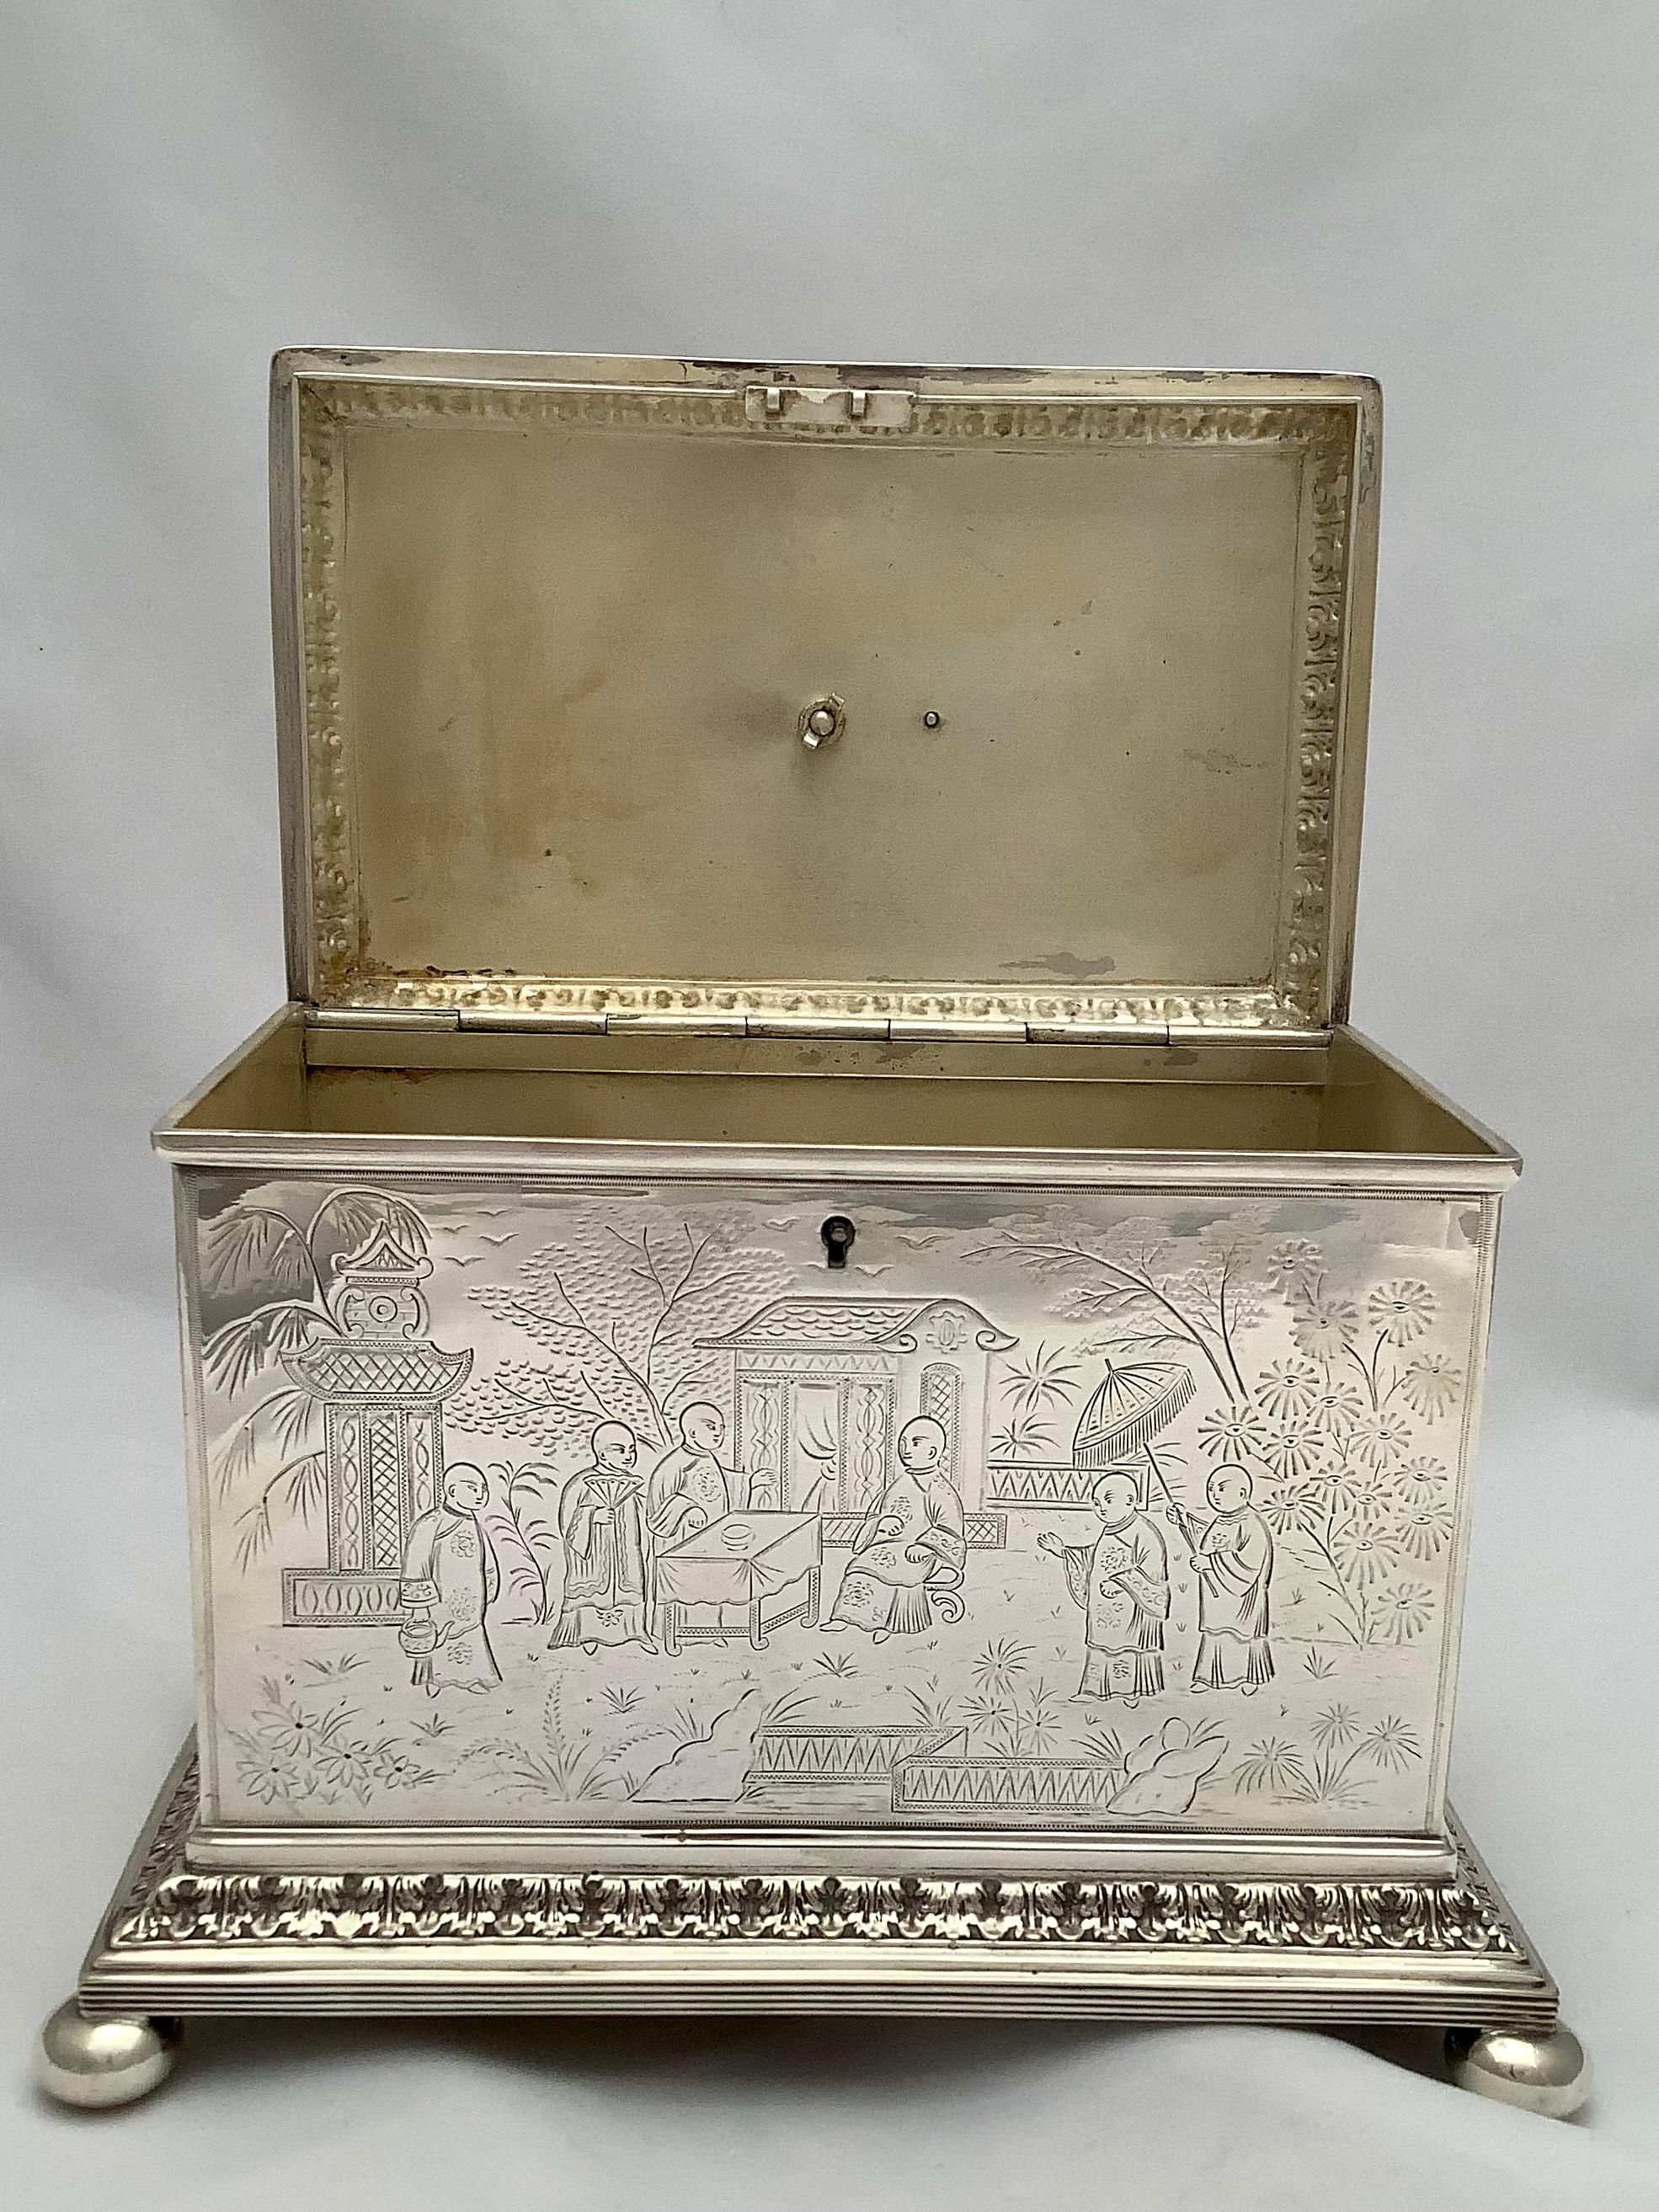 A silver tea caddy box with fine engraving depicting a Chinoiserie style design. Acanthus leaf details and sphinx sitting on top of the box. The box sits on four feet and has a locking mechanism as tea was a prized possession at the time the box was